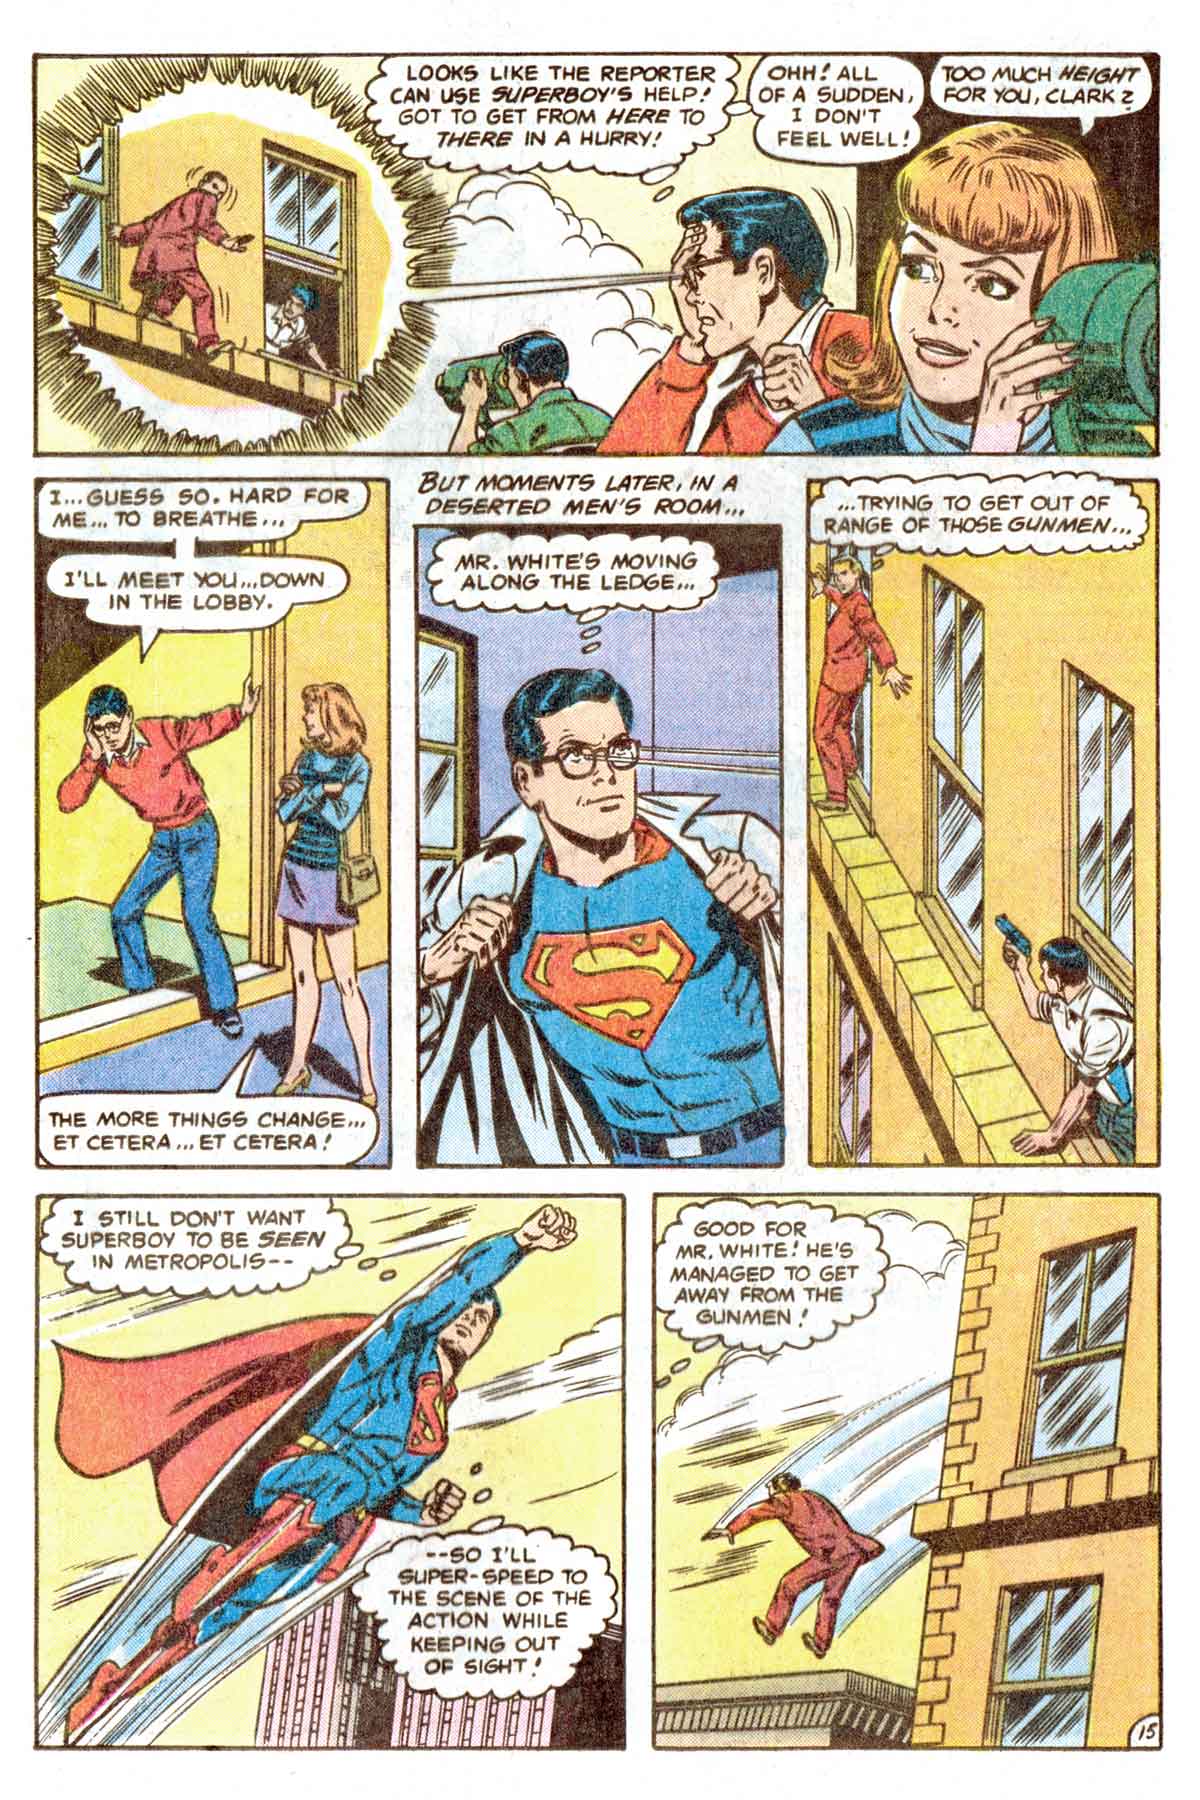 The New Adventures of Superboy 51 Page 15